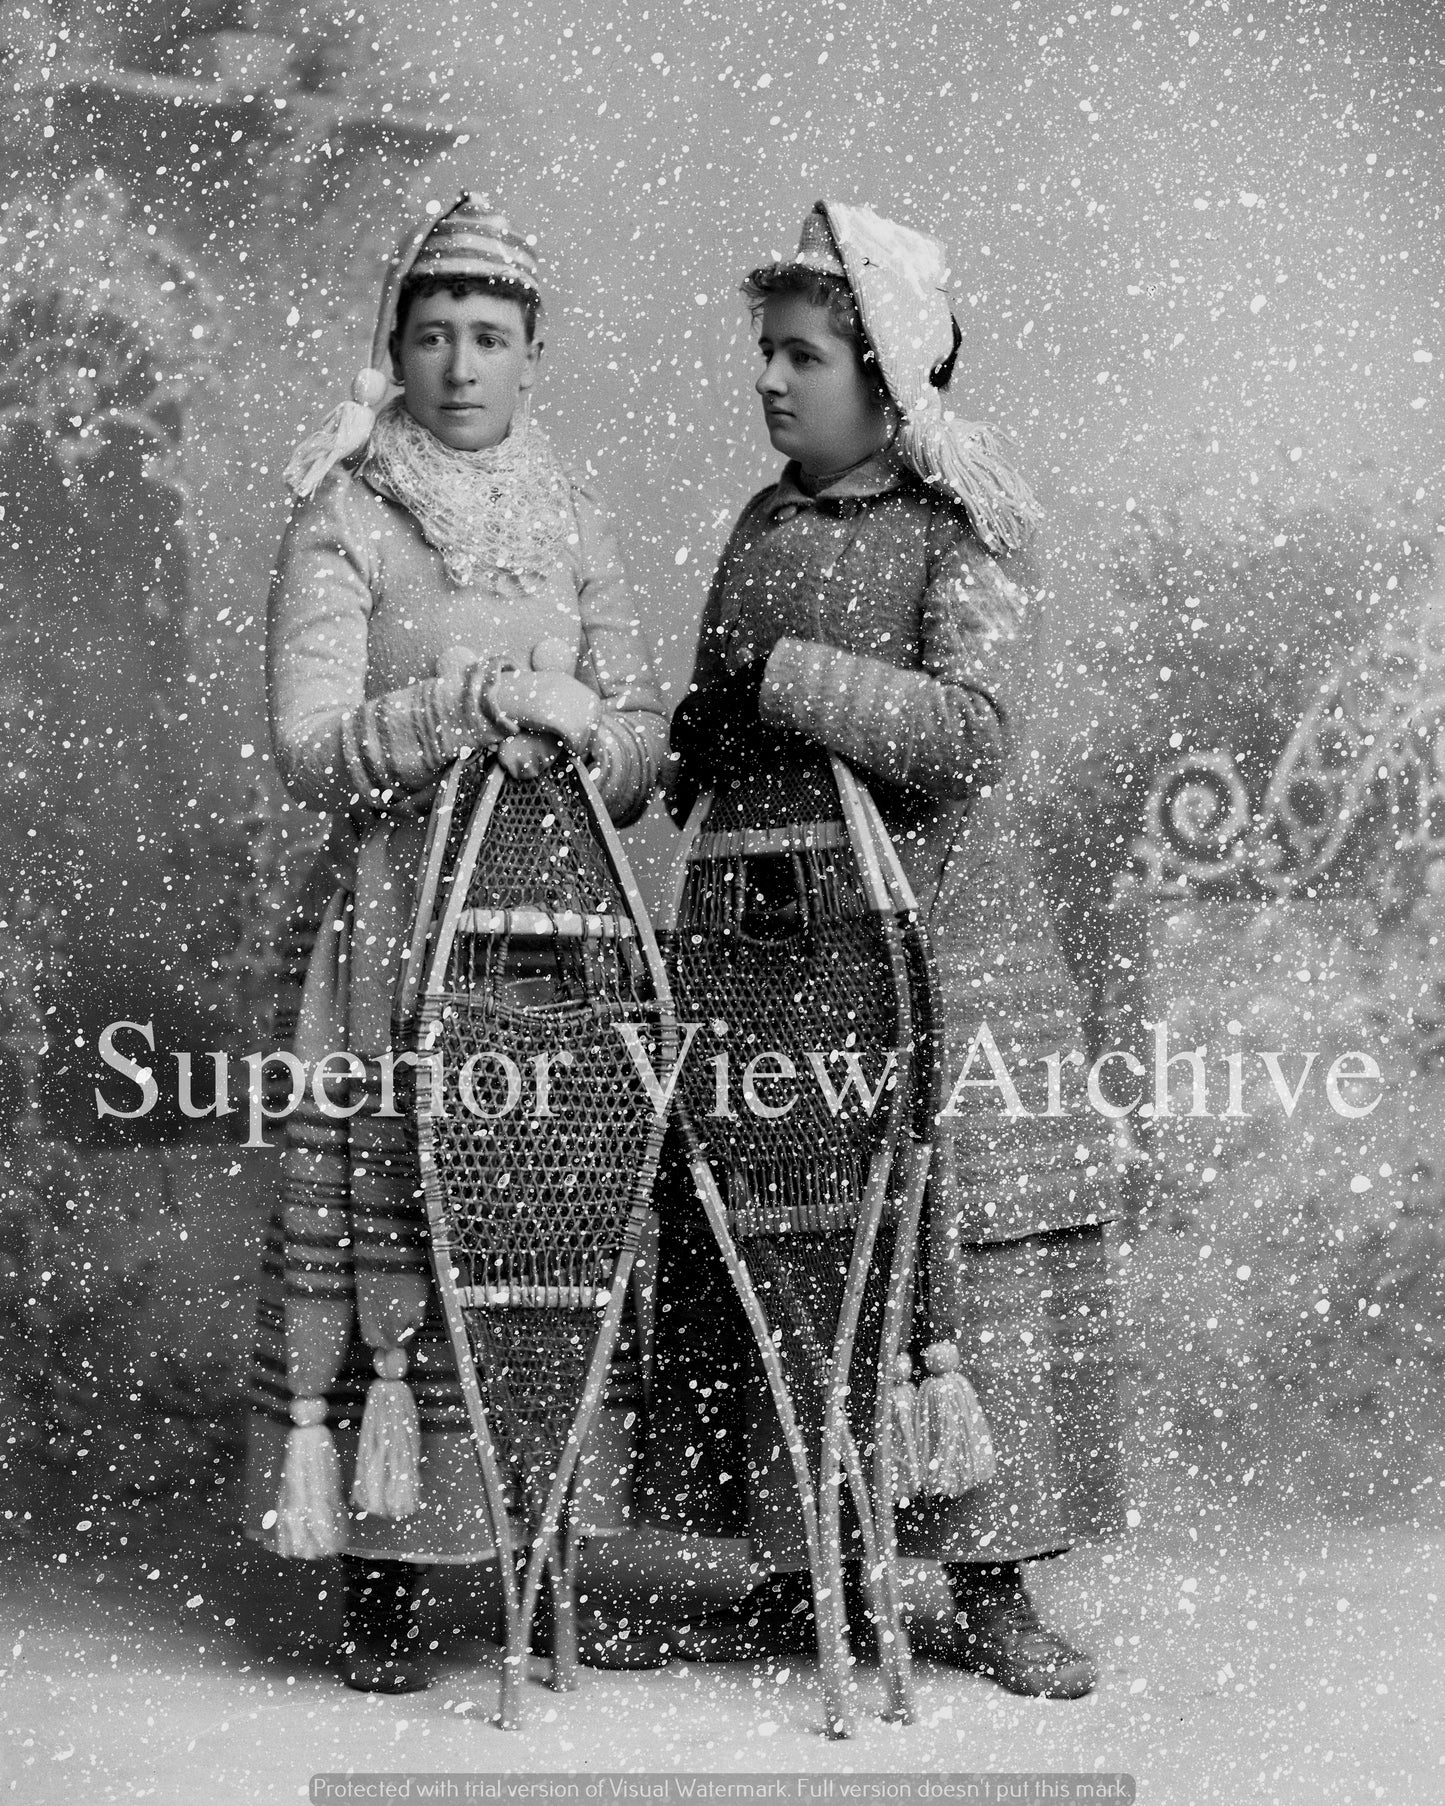 Women Posing with Snowshoes